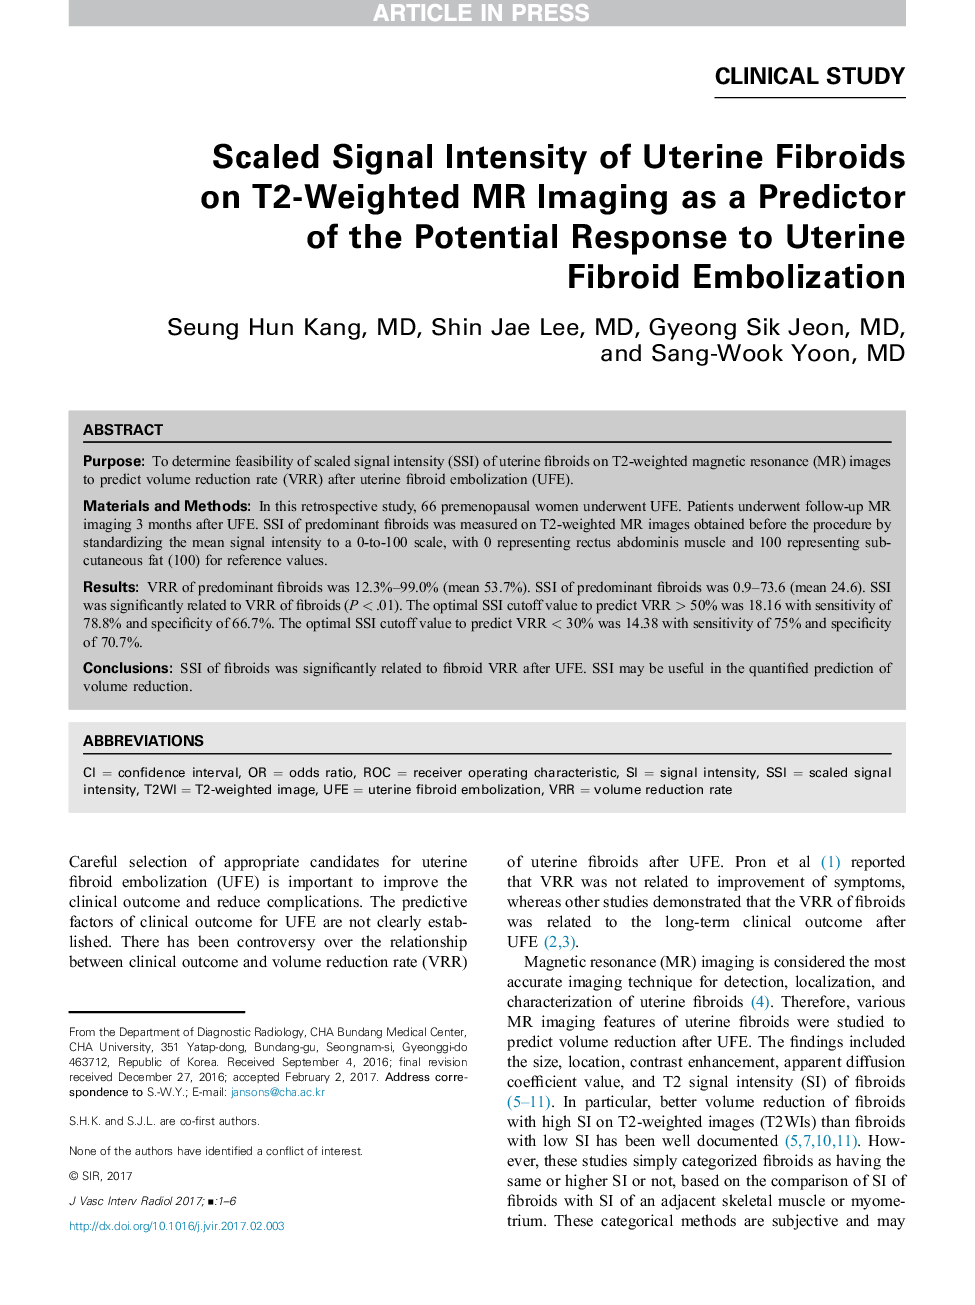 Scaled Signal Intensity of Uterine Fibroids on T2-Weighted MR Imaging as a Predictor of the Potential Response to Uterine Fibroid Embolization